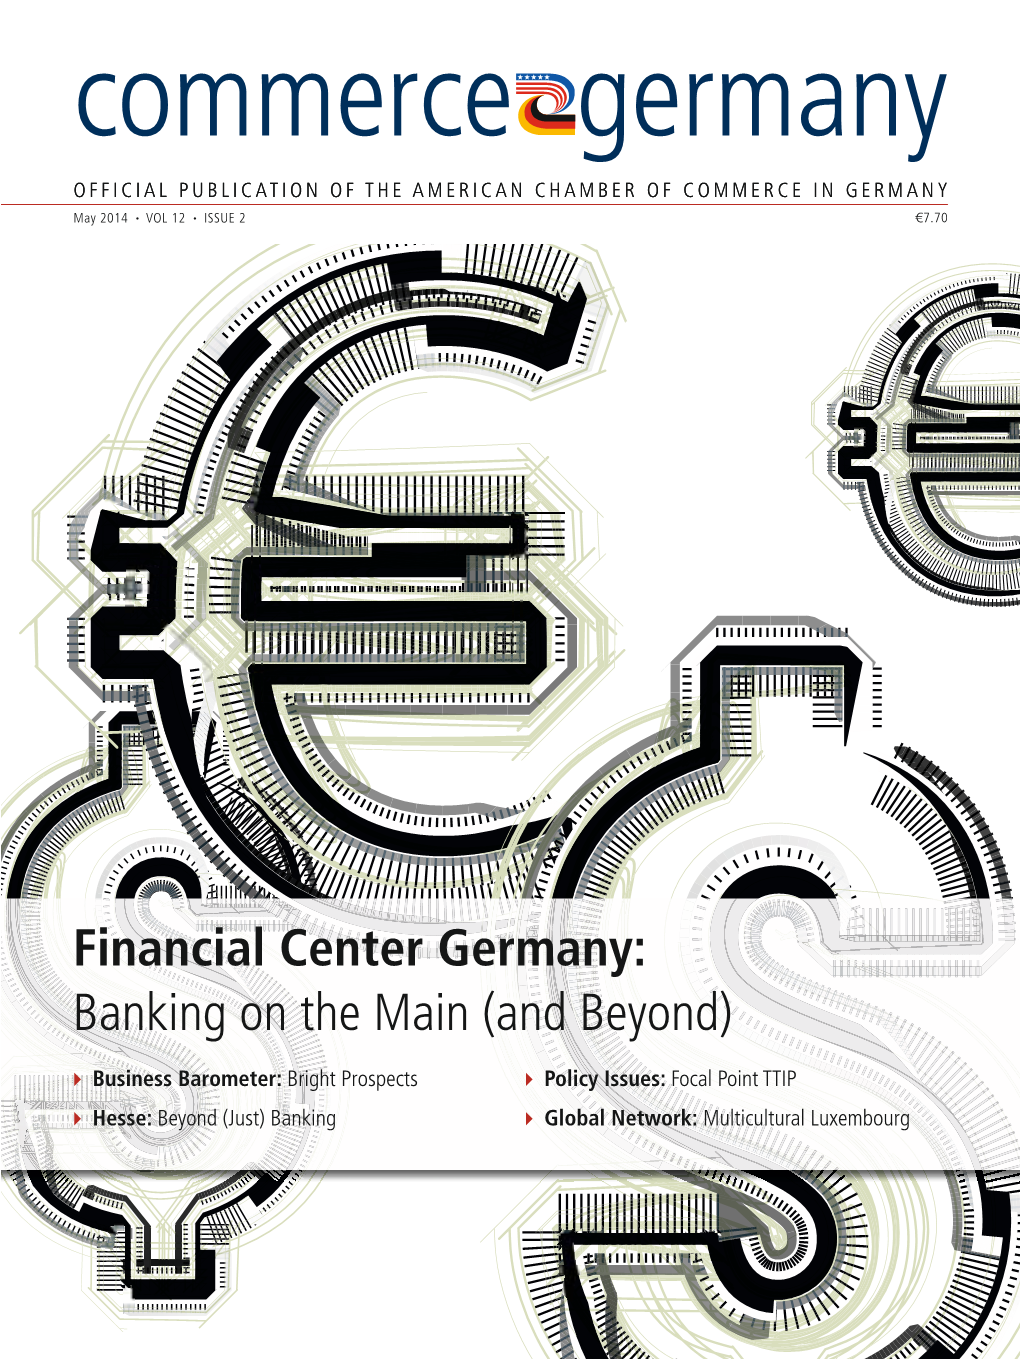 Financial Center Germany: Banking on the Main (And Beyond)